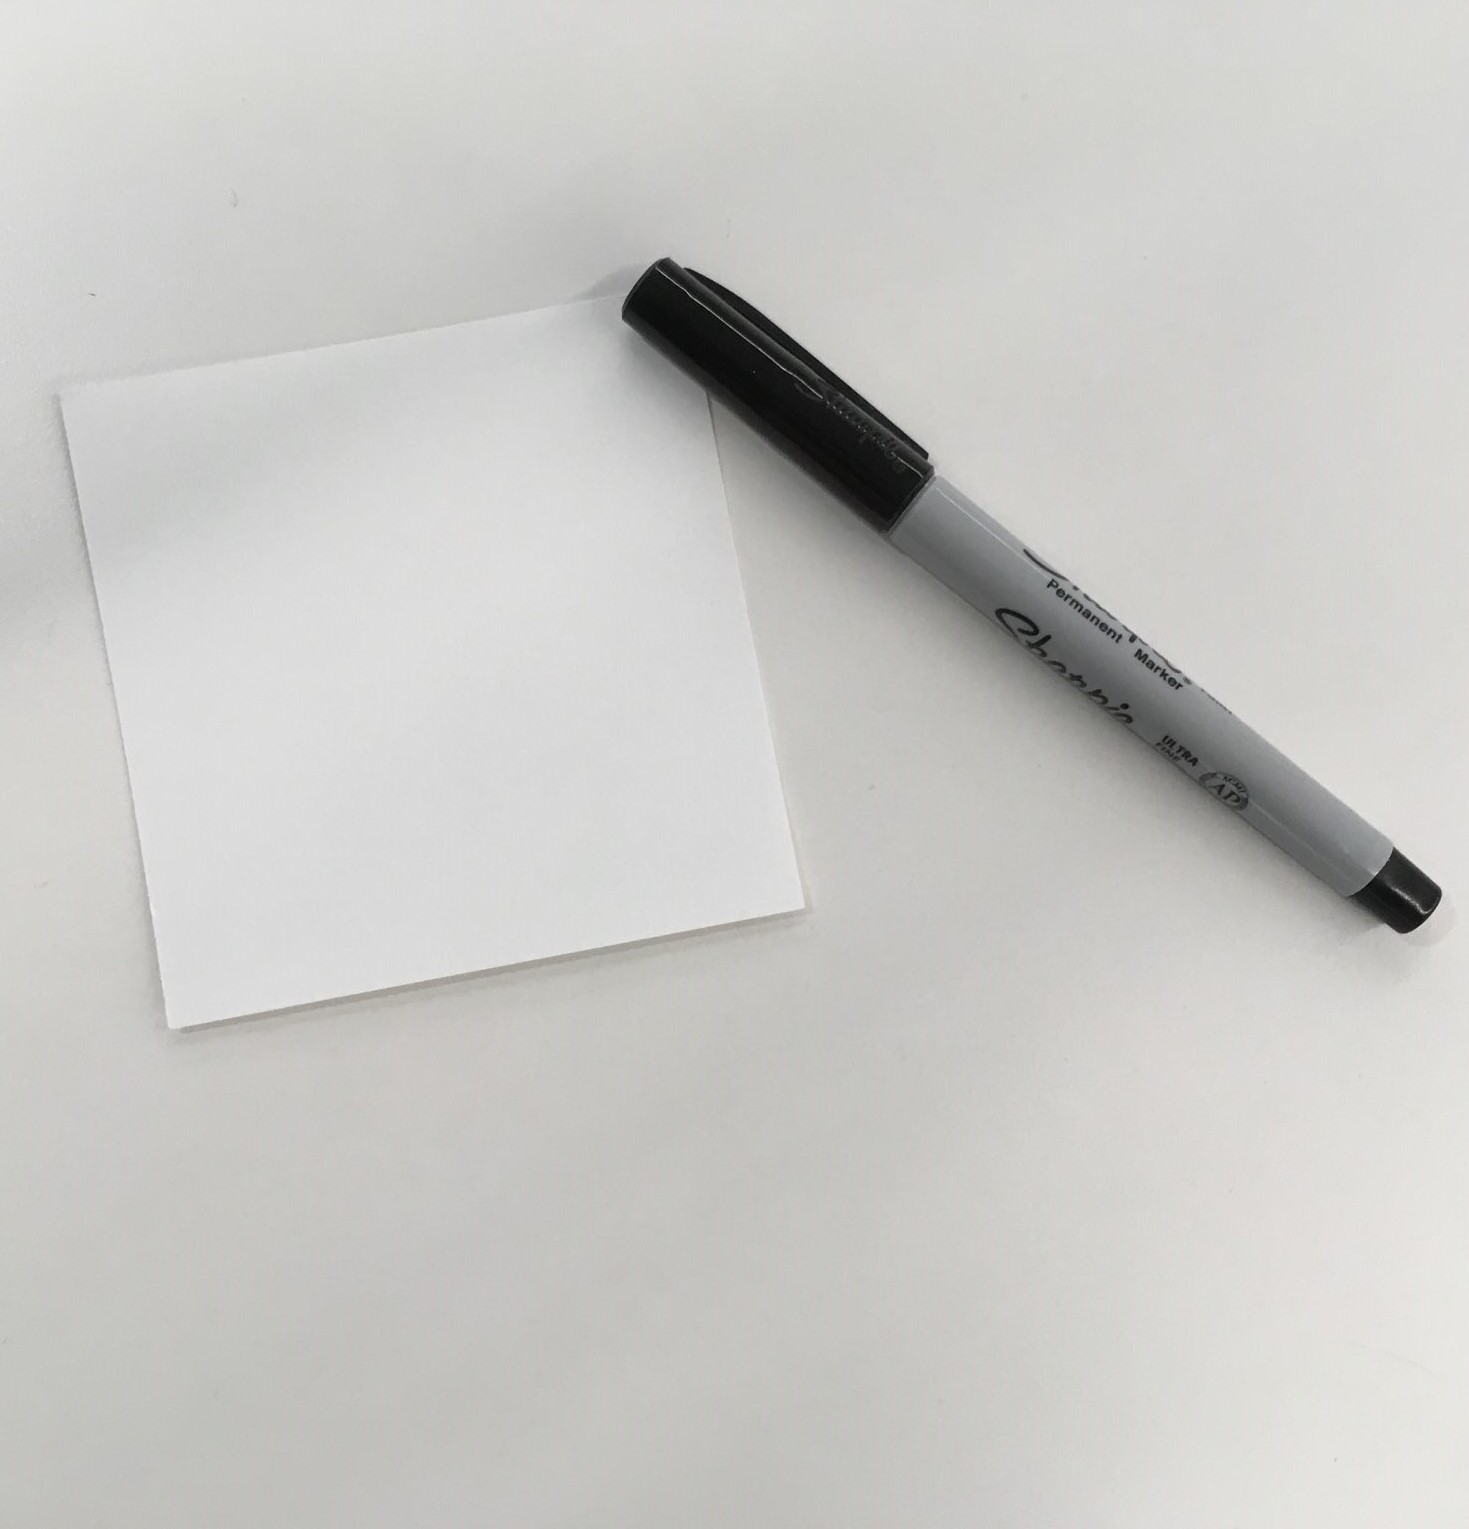 Blank square of paper with marker.